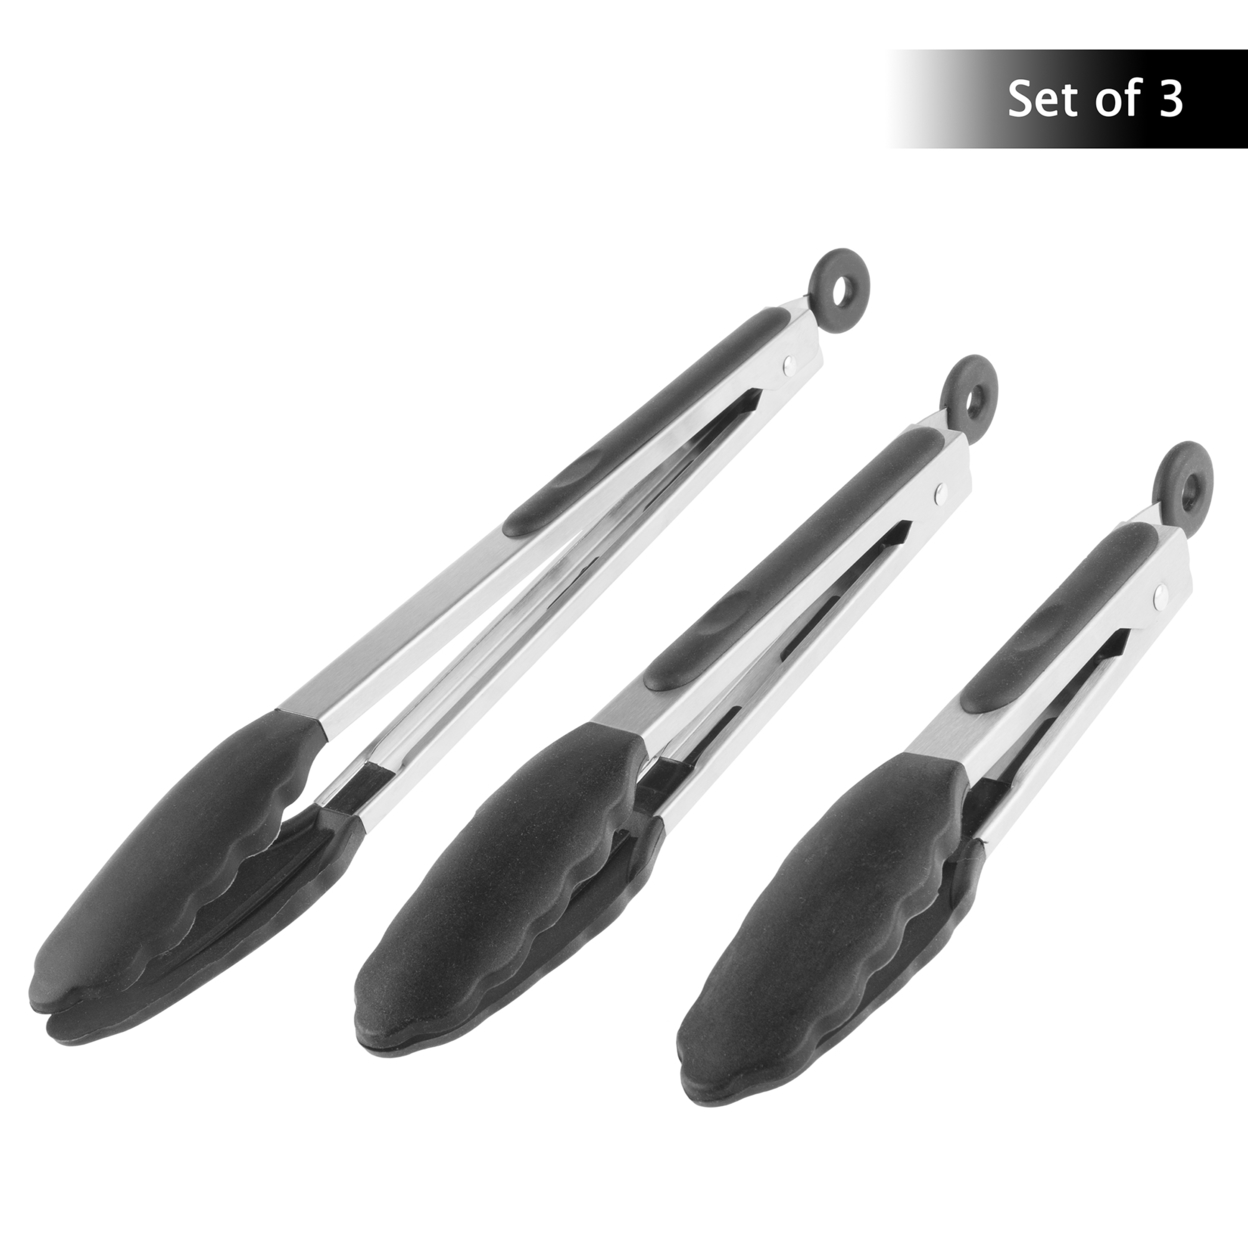 Set Of 3 Non Stick Stainless Steel Silicone Locking Tongs For Cooking BBQ Grill Salads